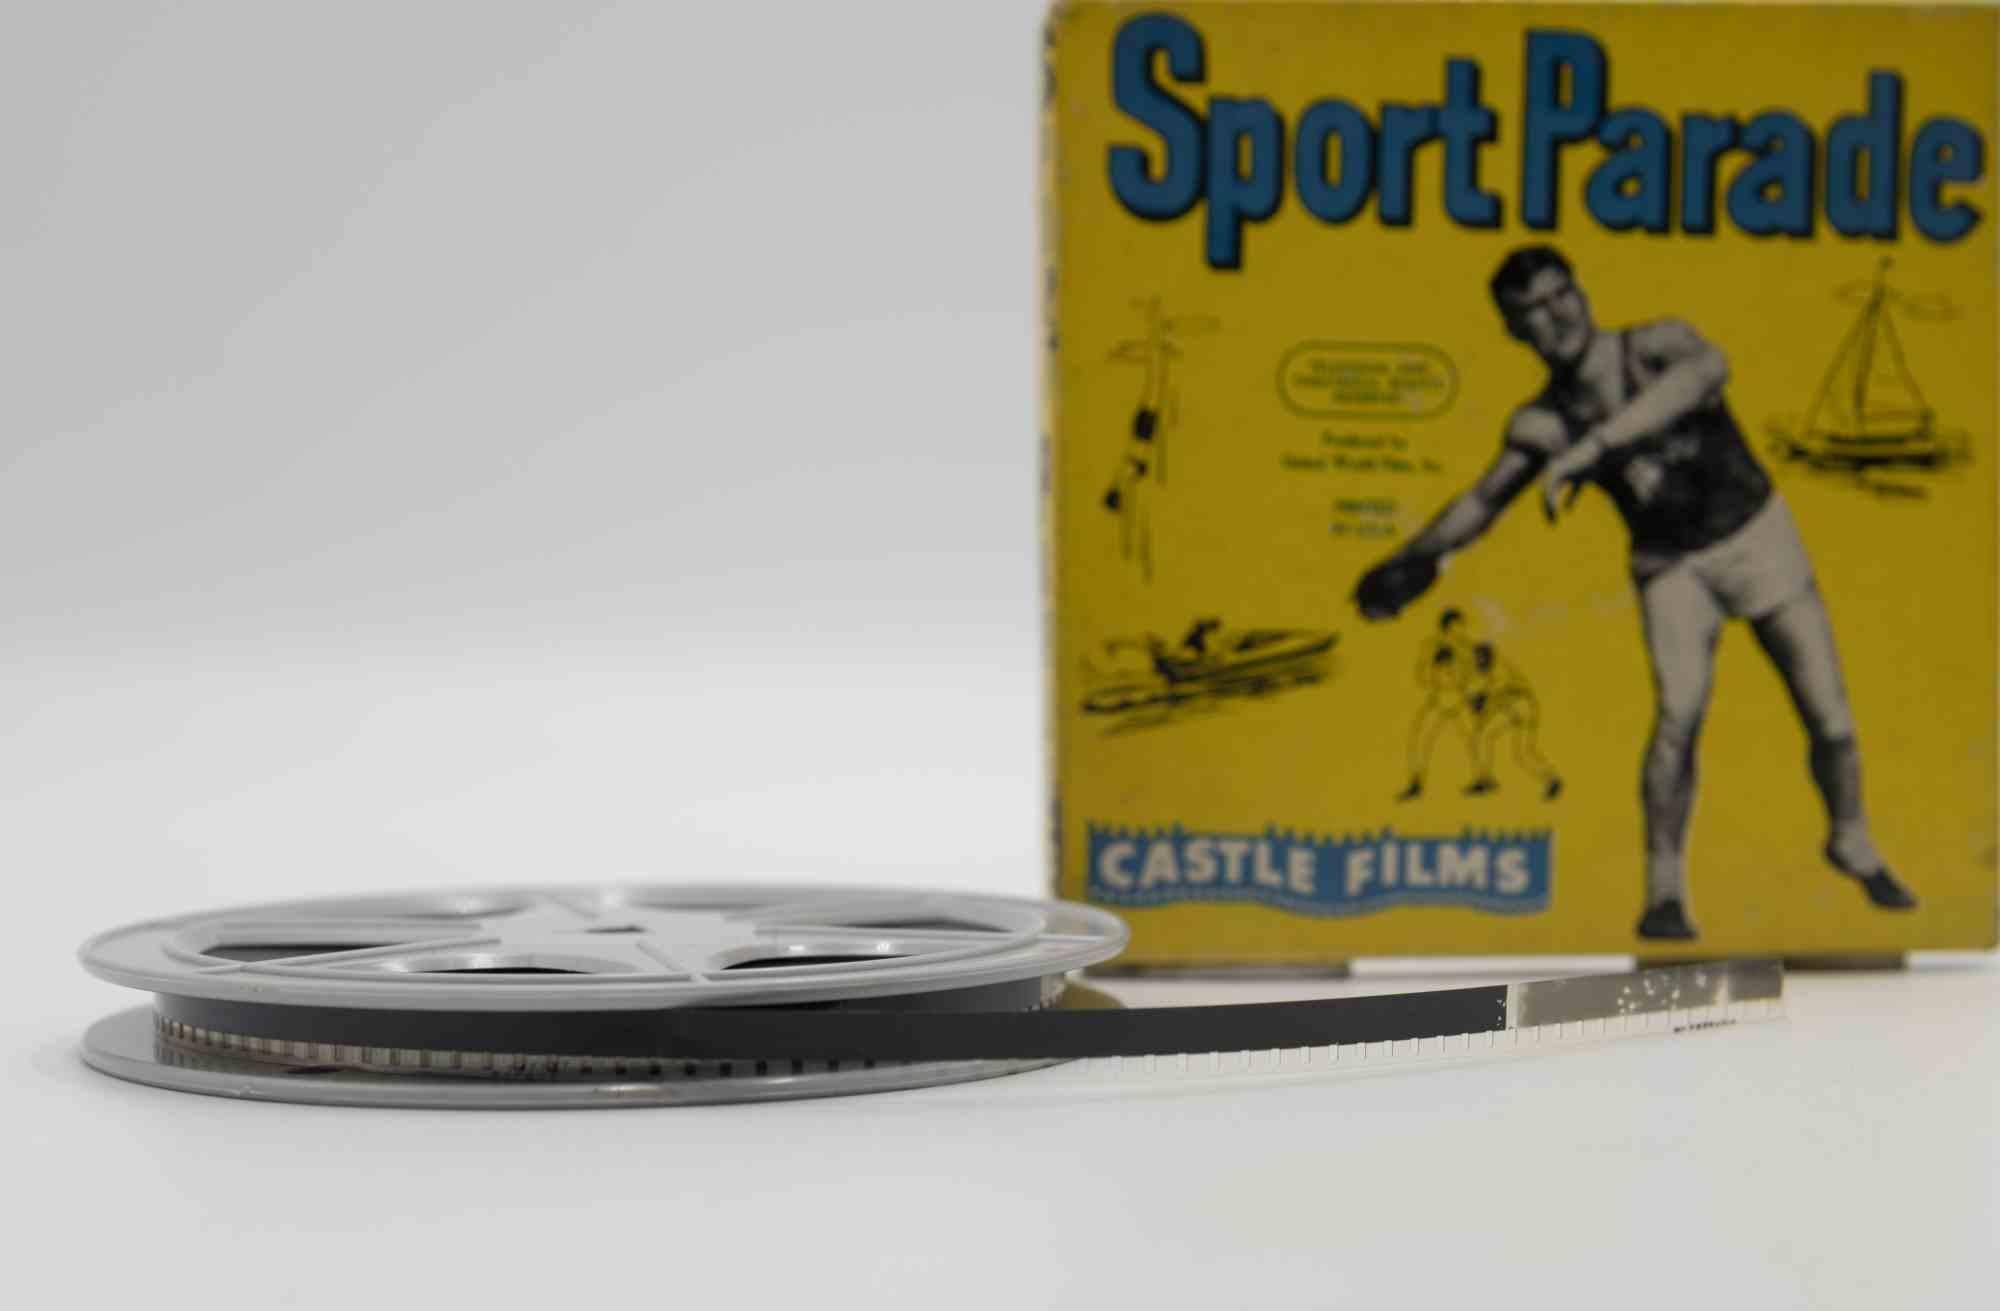 Sports parade film is an original film from the 1950s.

It includes original packaging.

8mm or 16mm.

Good conditions